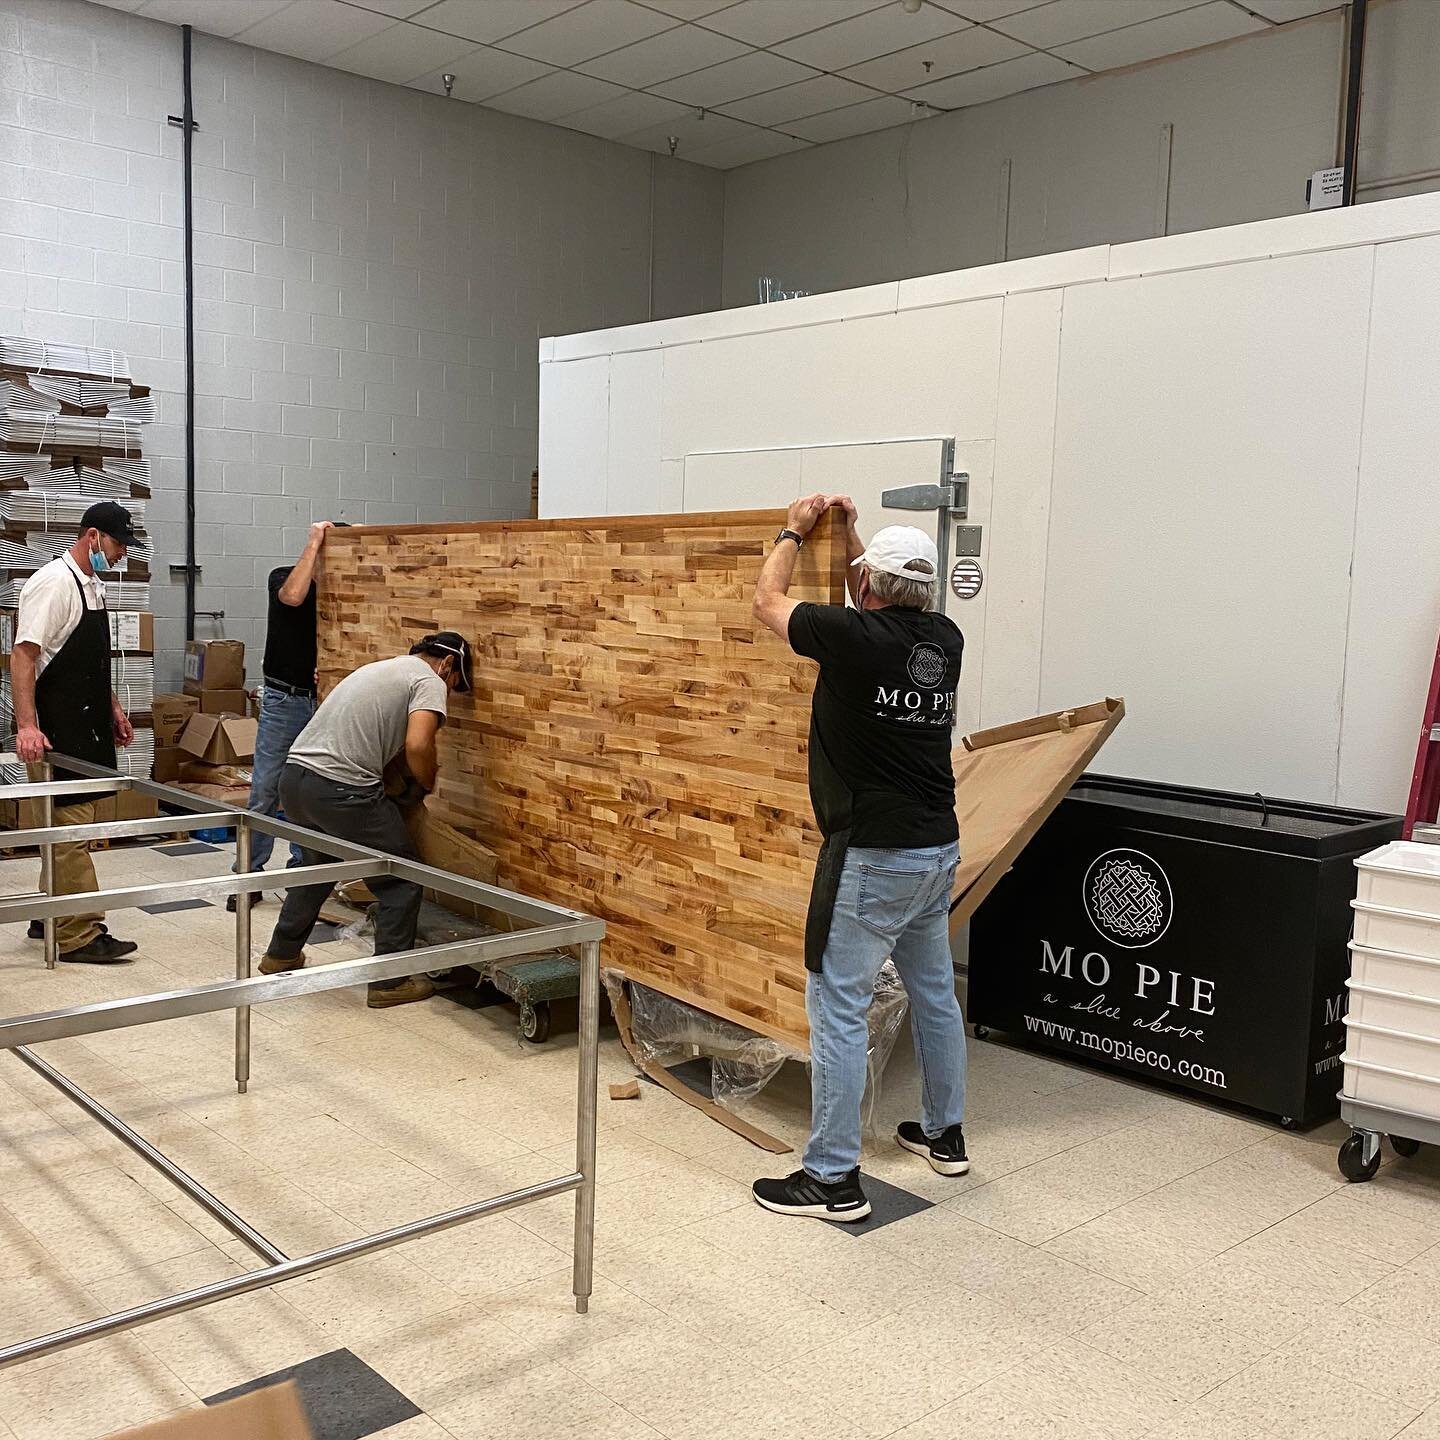 Our new bakers table has been delivered! Weighing in at 1400 pounds and measuring 12&rsquo;x6&rsquo;, this boos block table allows eight pastry chefs to work simultaneously!

We can&rsquo;t wait to get to work on this new table and bring you MO pies!